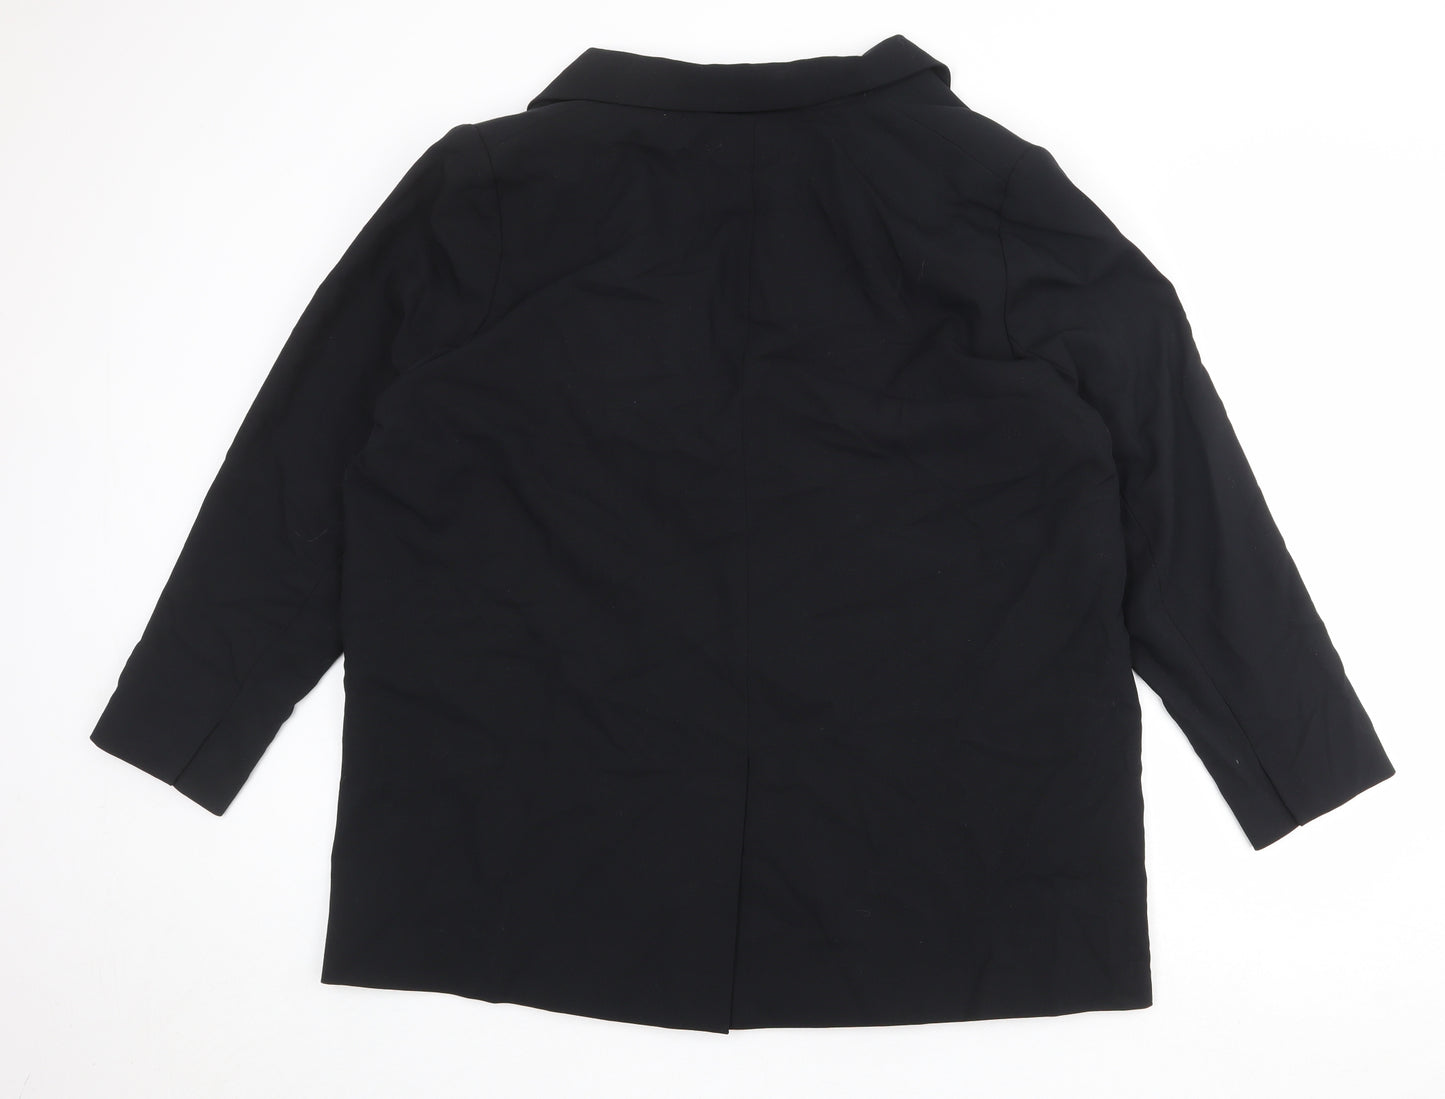 Marks and Spencer Womens Black Polyester Jacket Suit Jacket Size 22